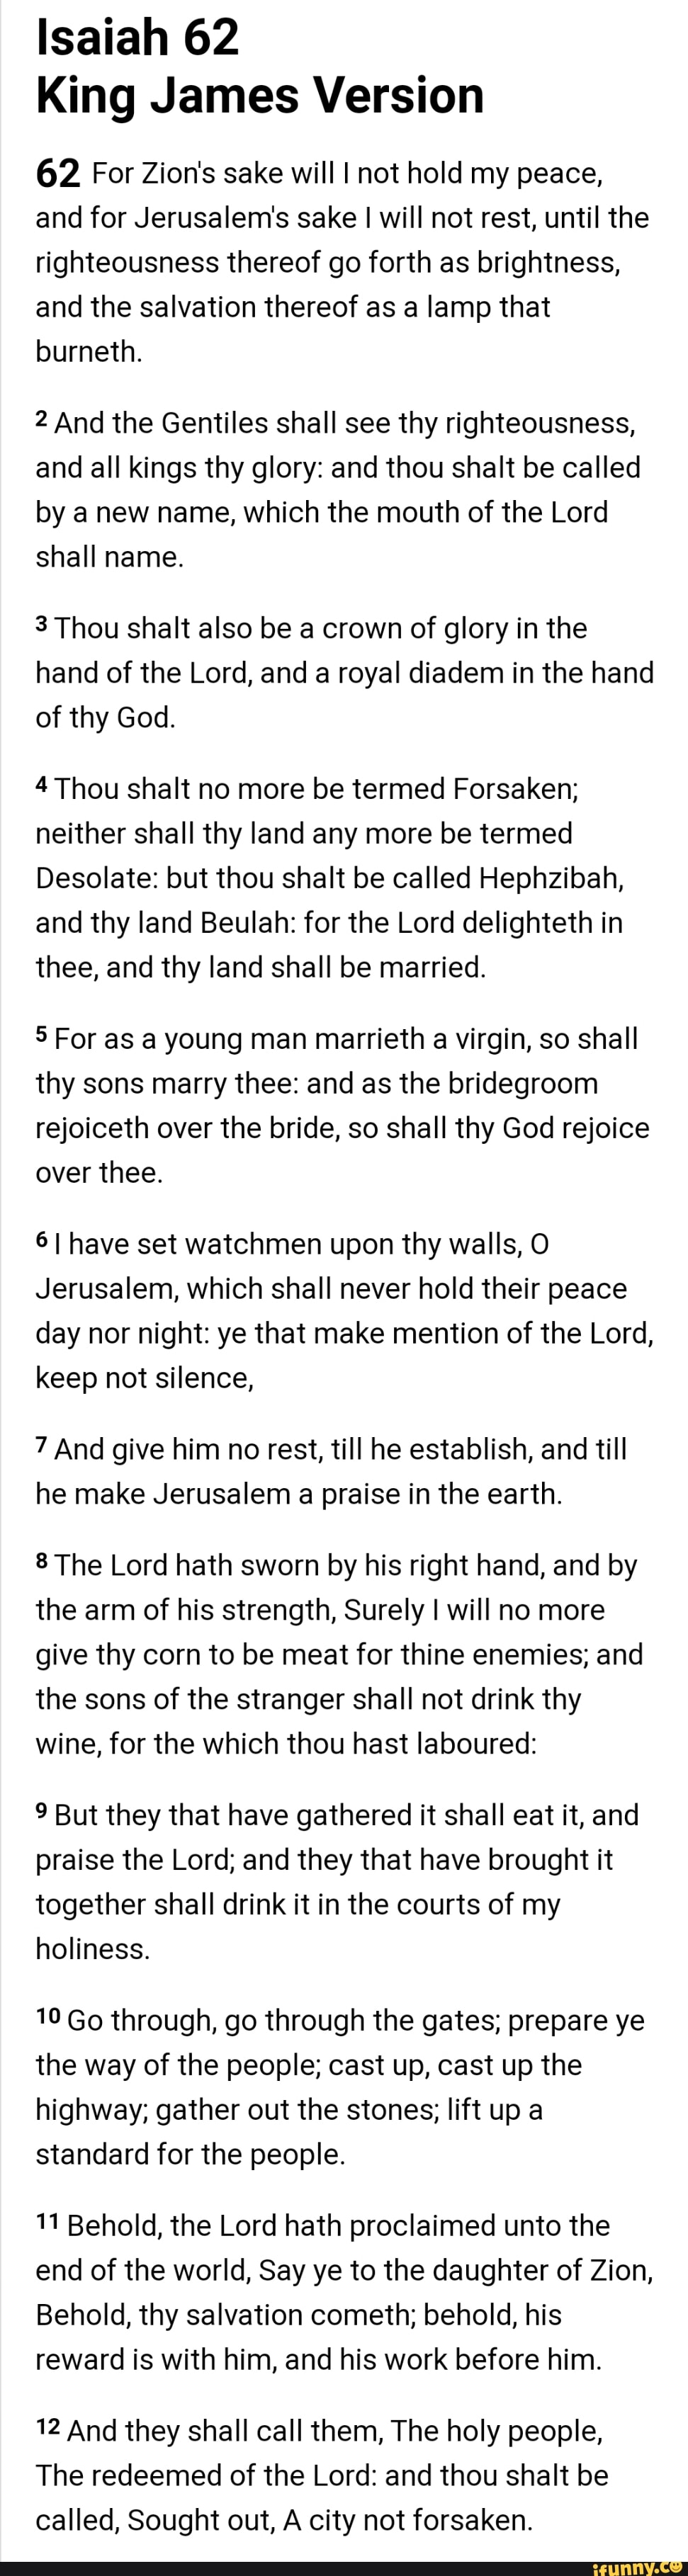 Isaiah 62 King James Version 62 For Zion's sake will I not hold my ...